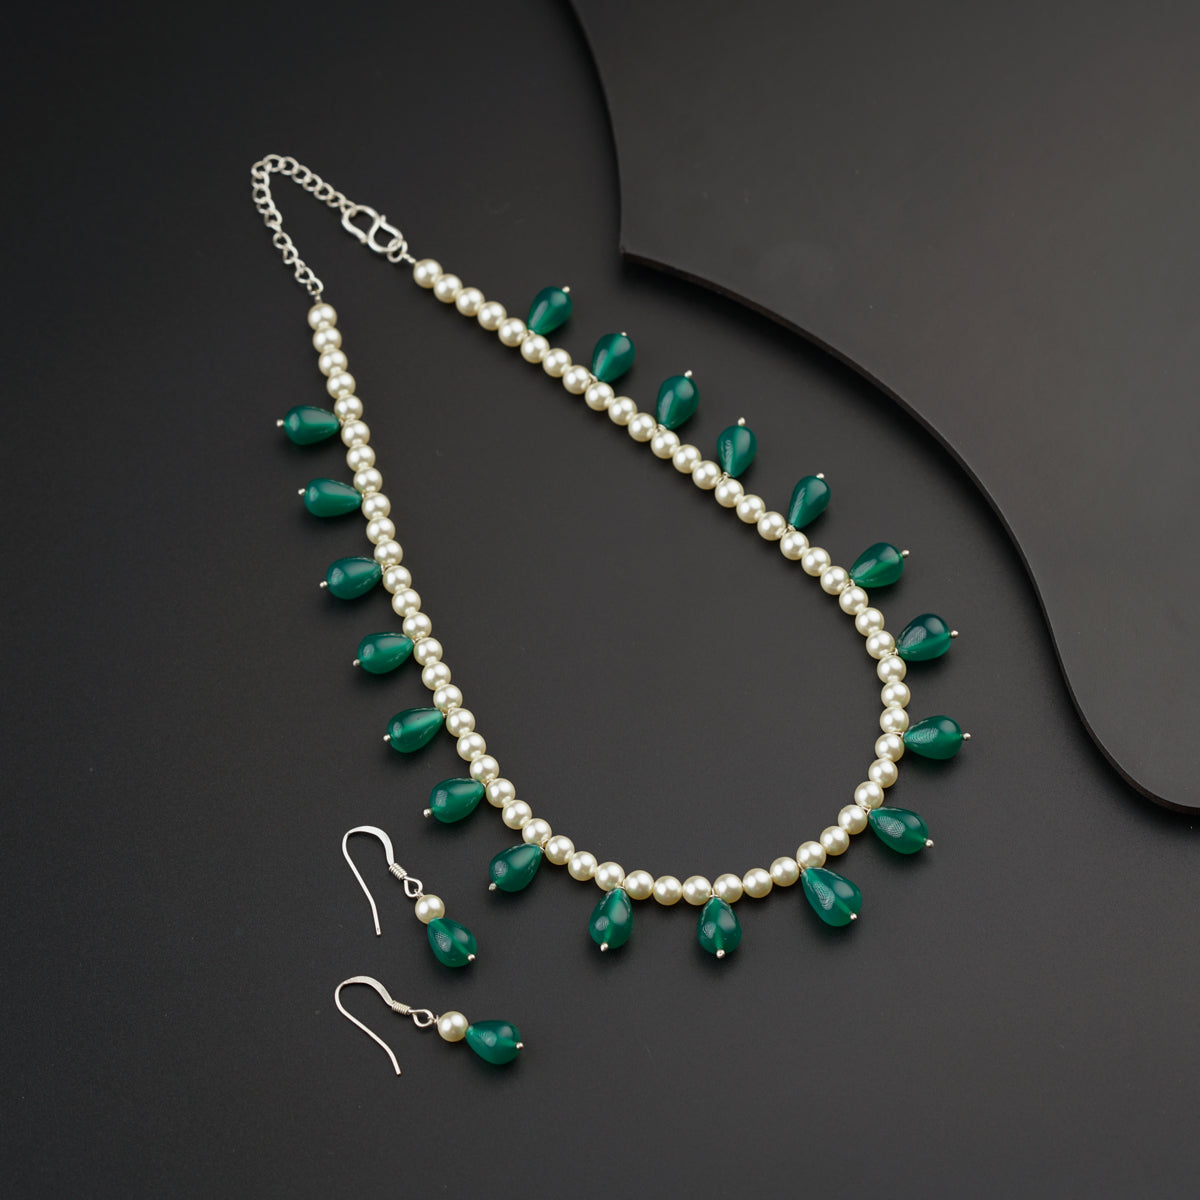 a green and white necklace and earrings on a black surface